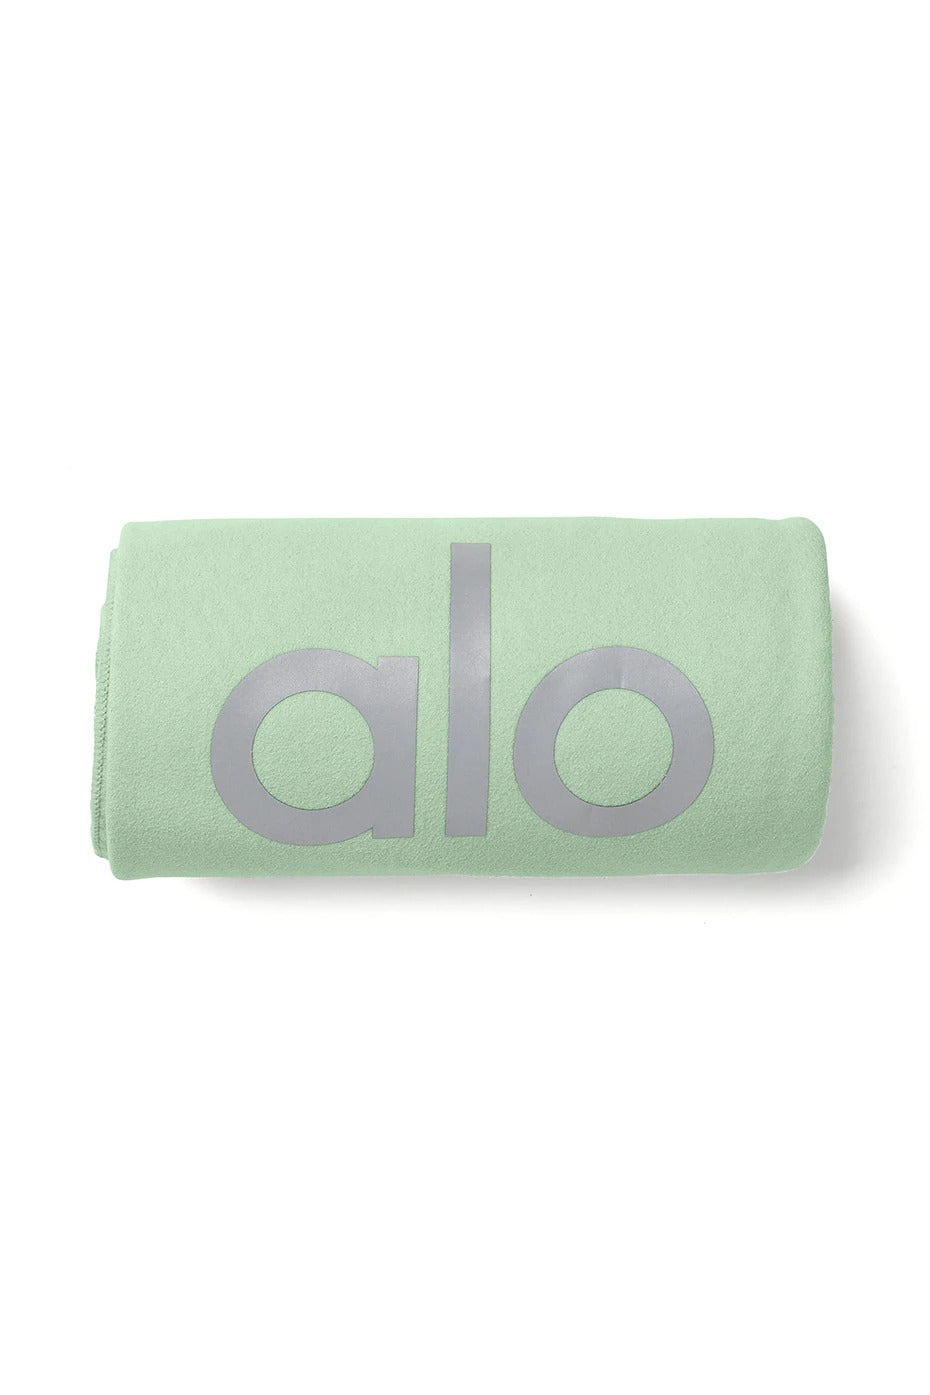 ALO Grounded No-Slip Mat Towel – Leisure Social